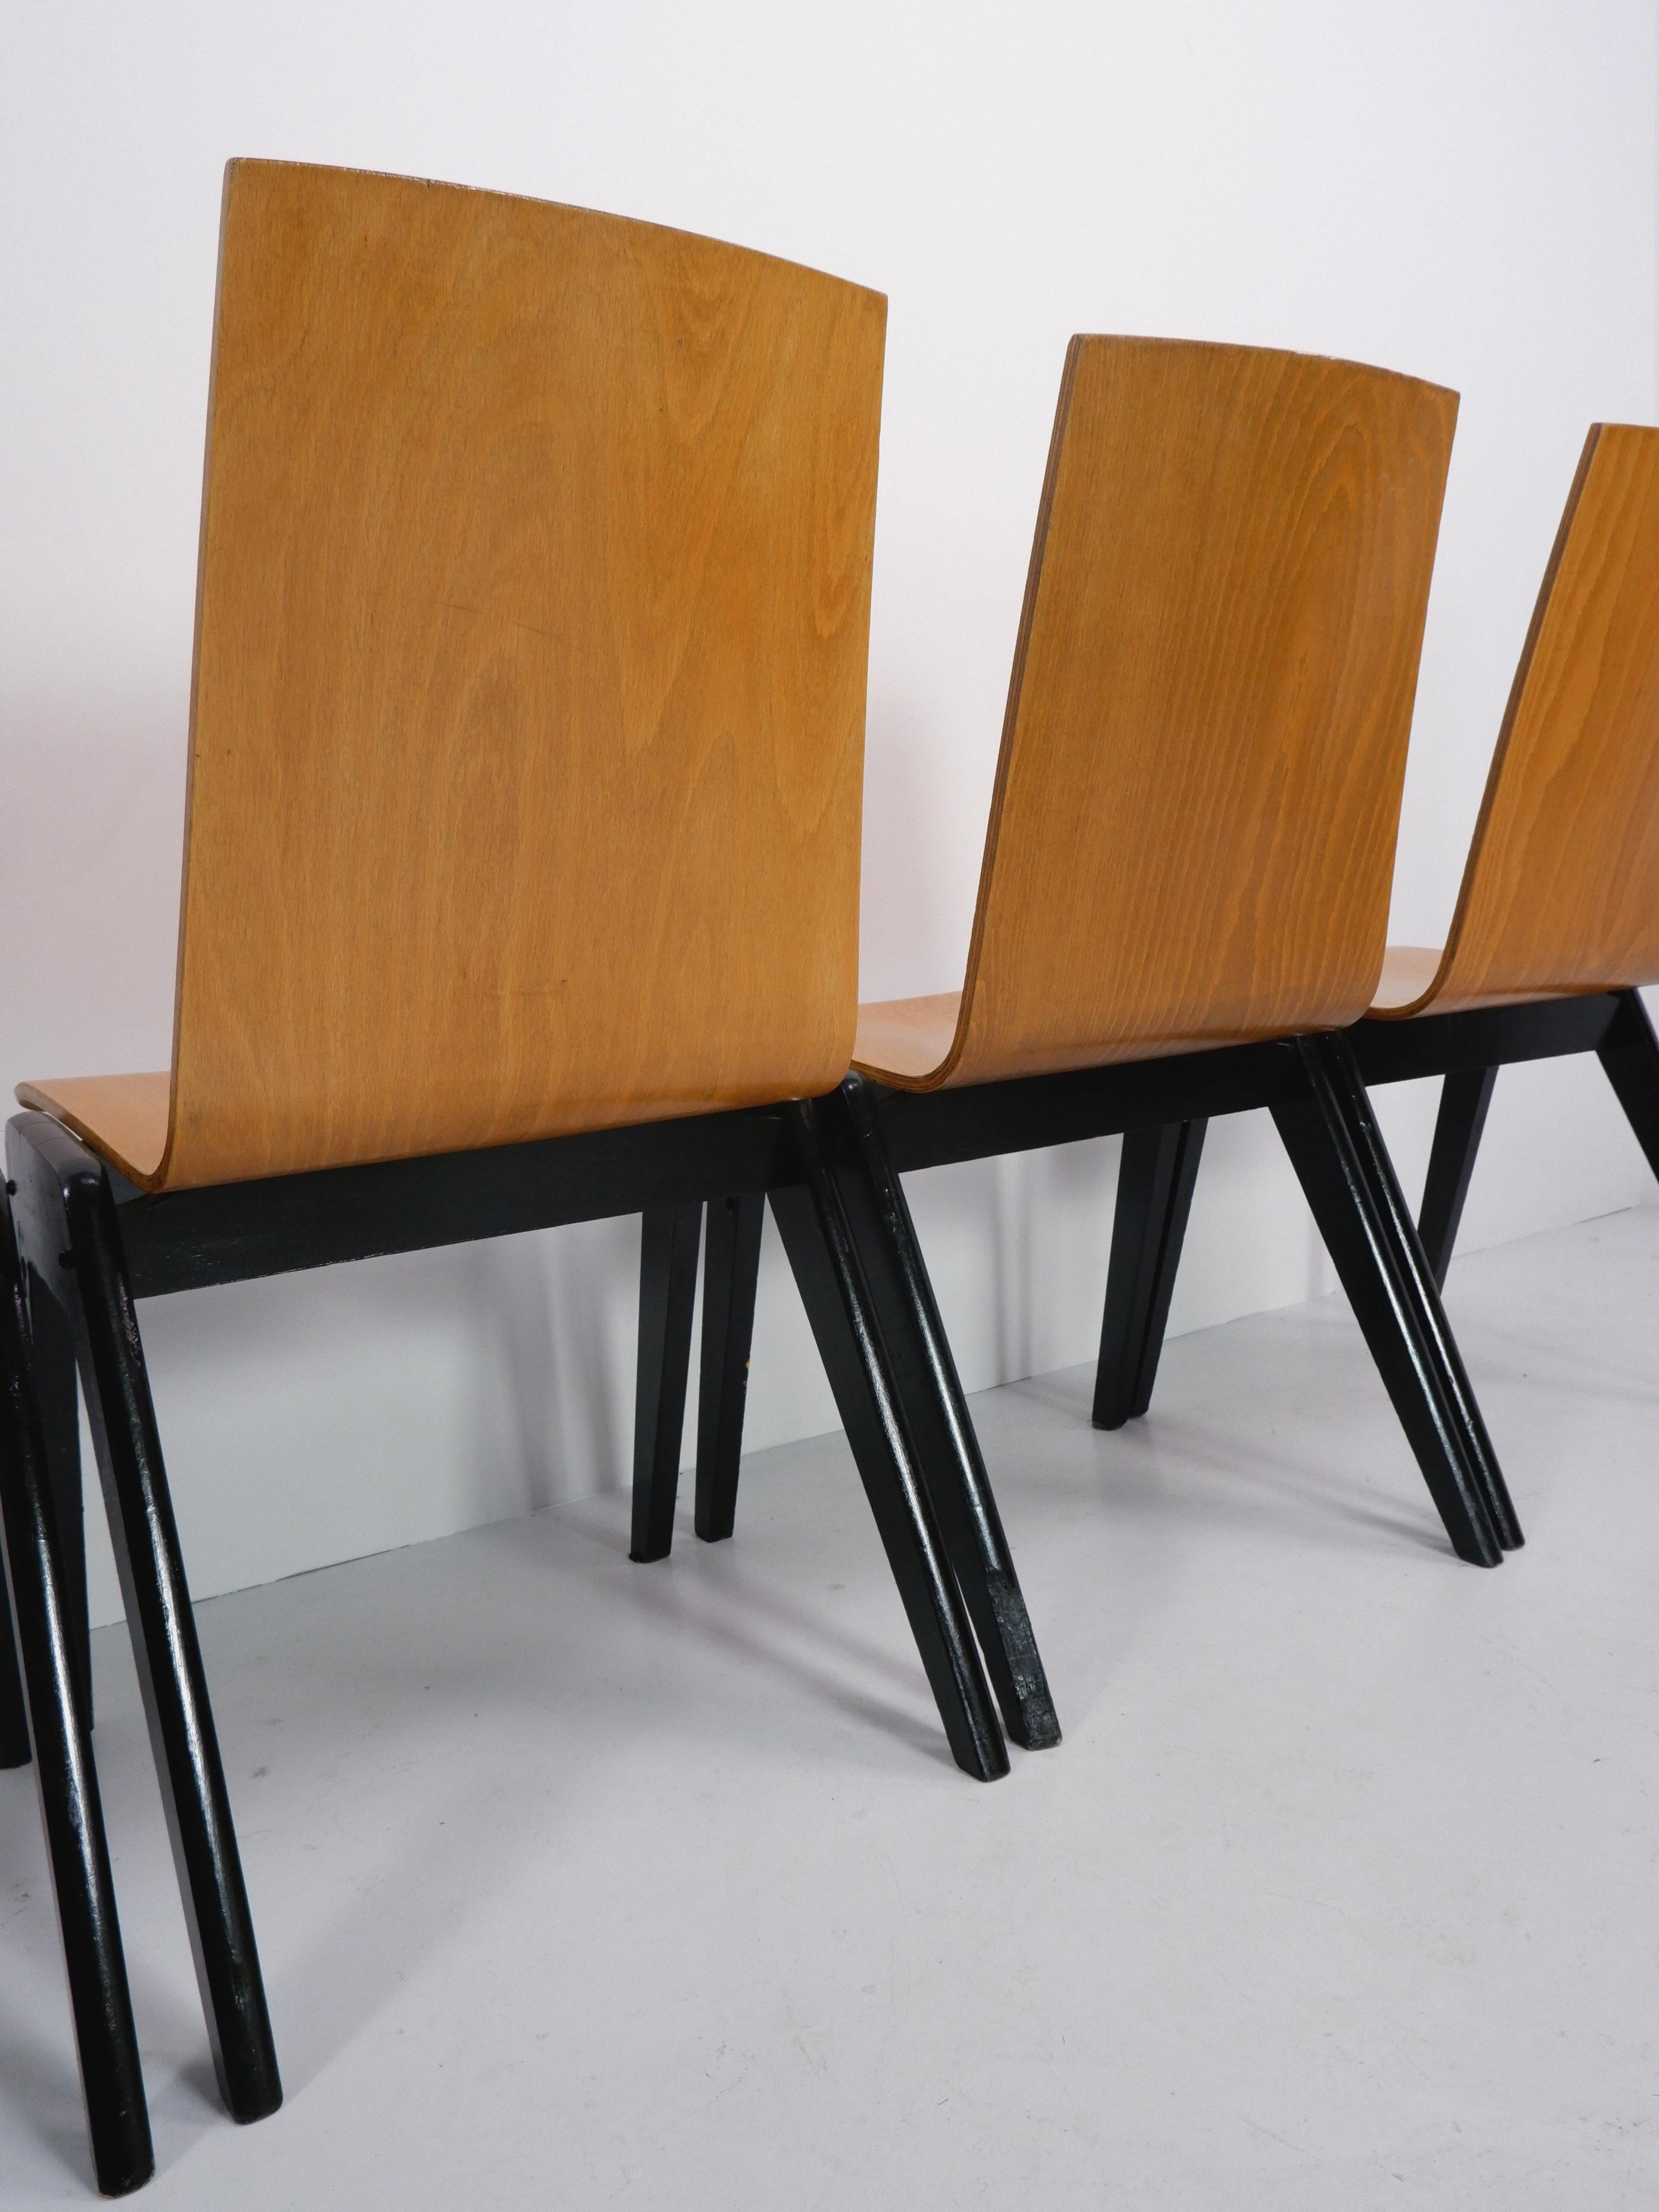 Plywood Stacking Chairs attrb. Roland Rainer, c.1950 1